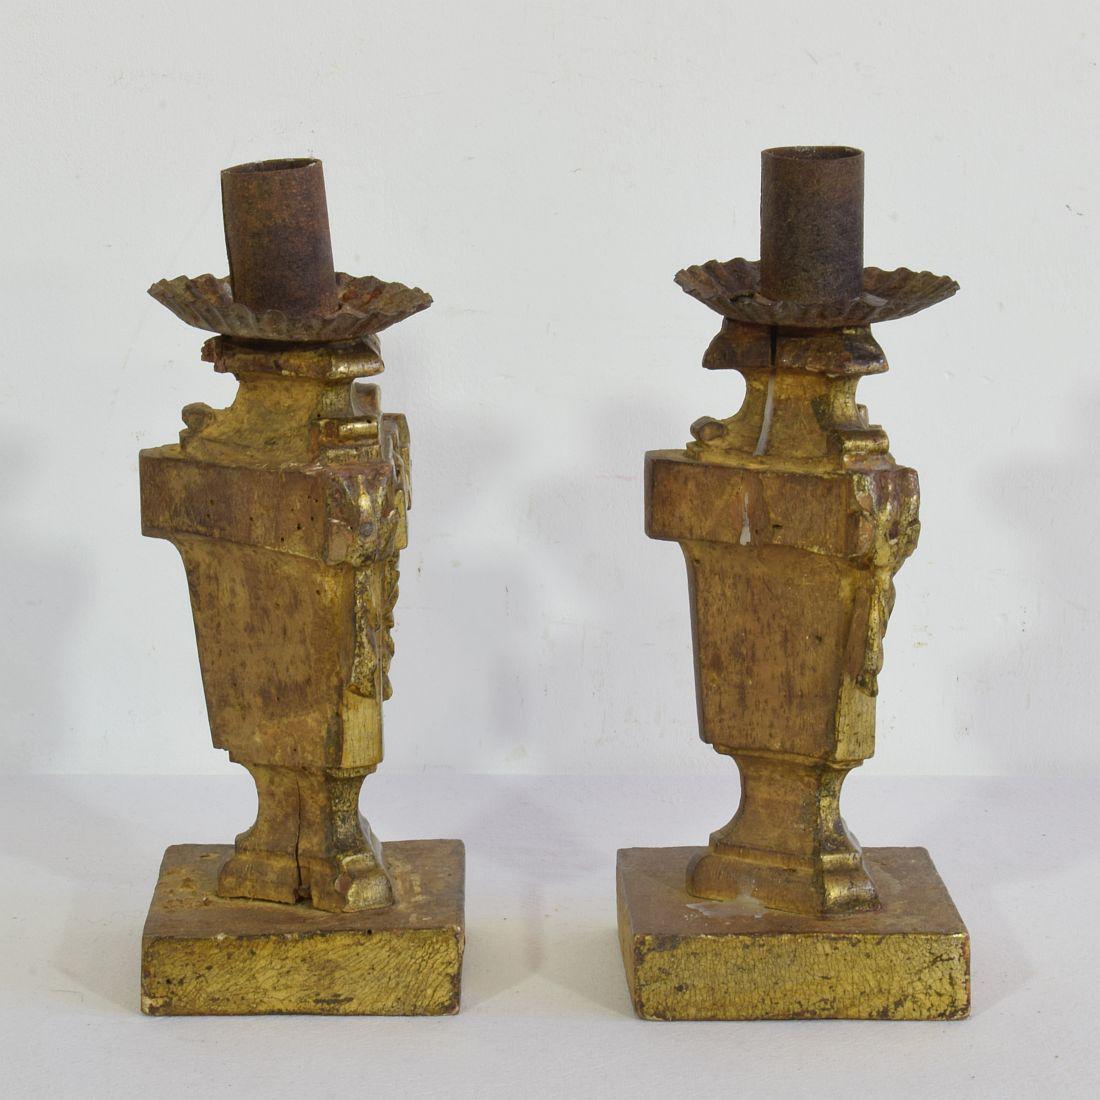 Pair of Small 18th Century Italian Neoclassical Candleholders / Candlesticks For Sale 1